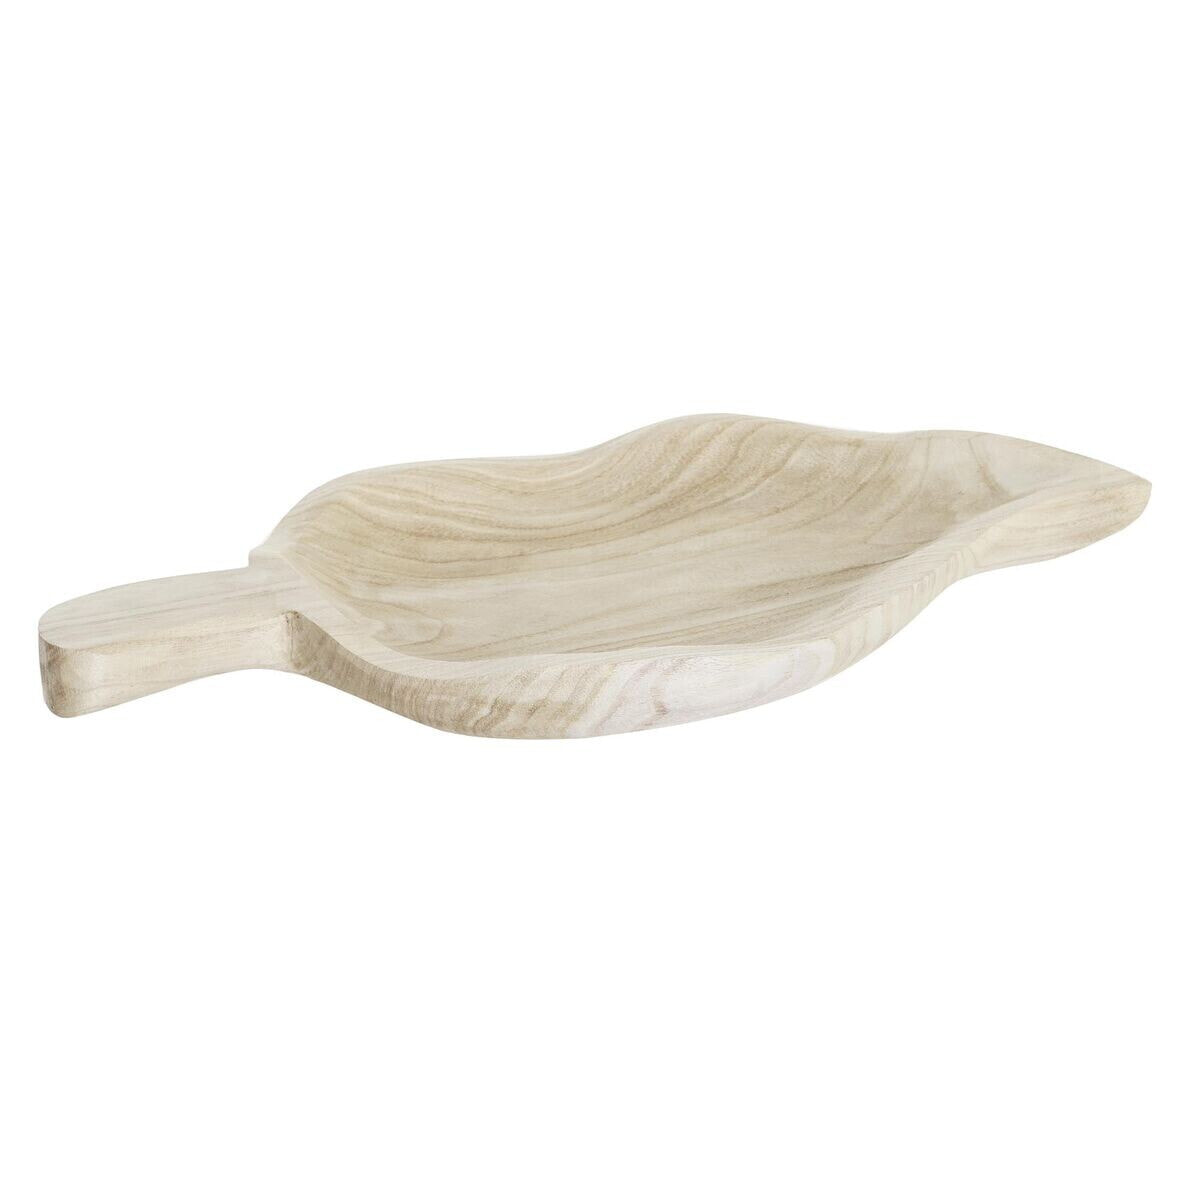 Snack tray DKD Home Decor Light brown Natural Tropical Leaf of a plant 56 x 28 x 5 cm